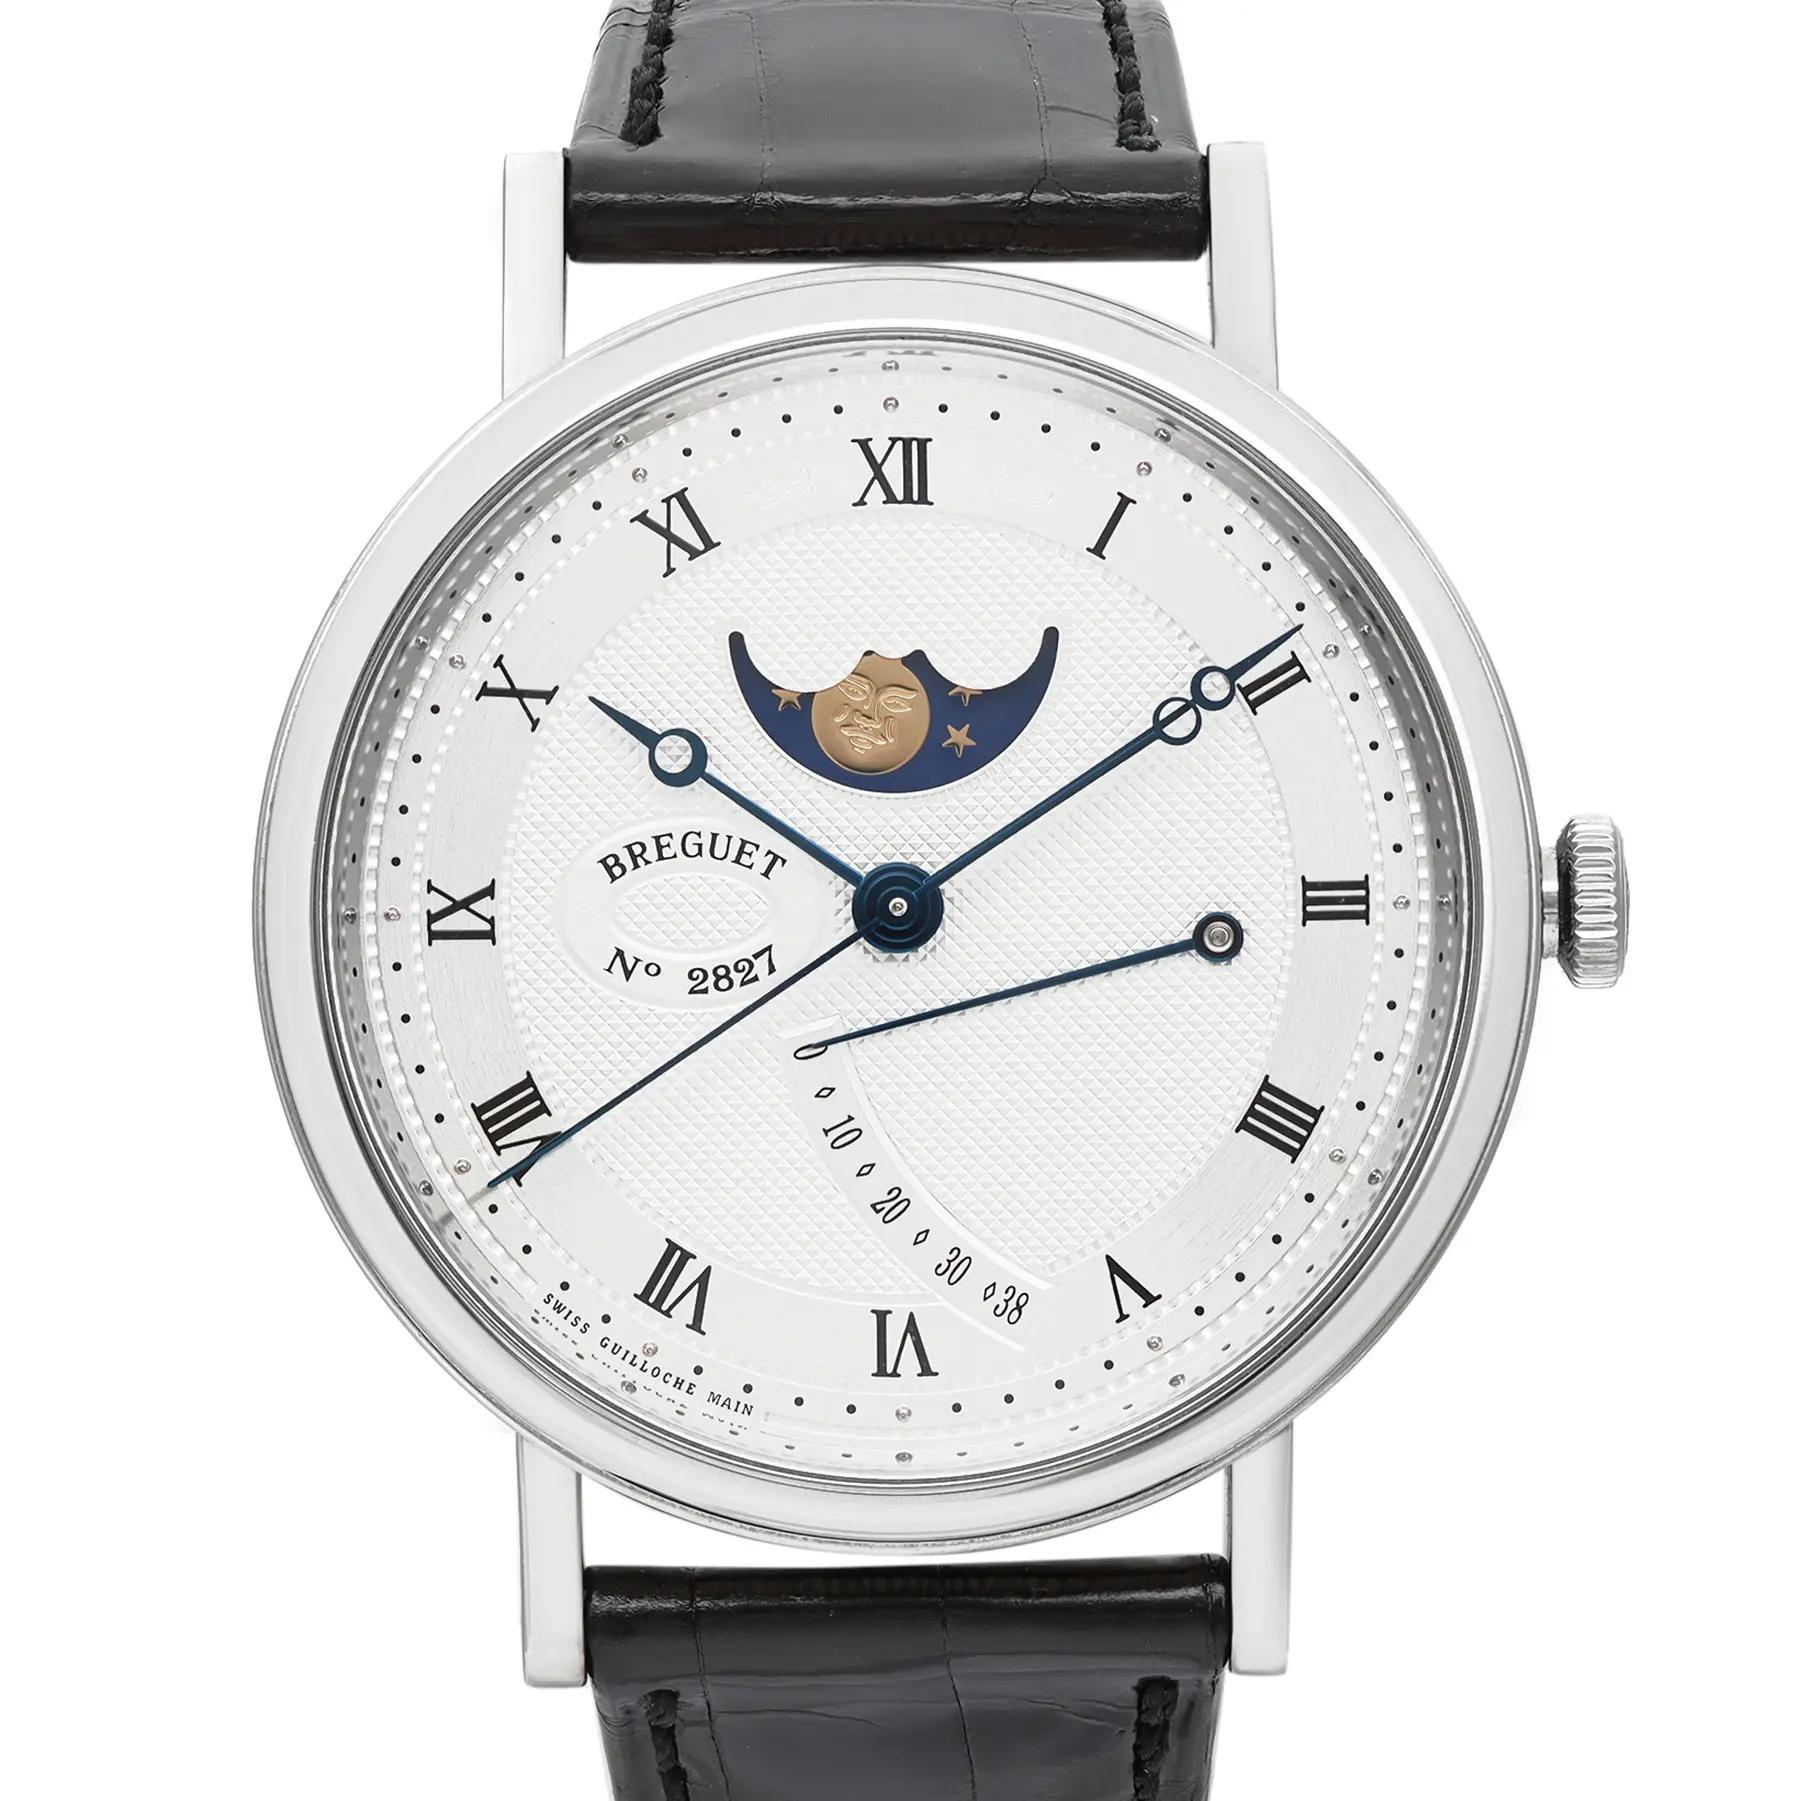 Pre-owned in new condition. Unworn band. Comes with original paper. No original box.

Brand: Breguet
Model Number: 7787BB/12/9V6
Department: Men
Country/Region of Manufacture: Switzerland
Style: Luxury
Model Name: Breguet Classique Moonphase Power